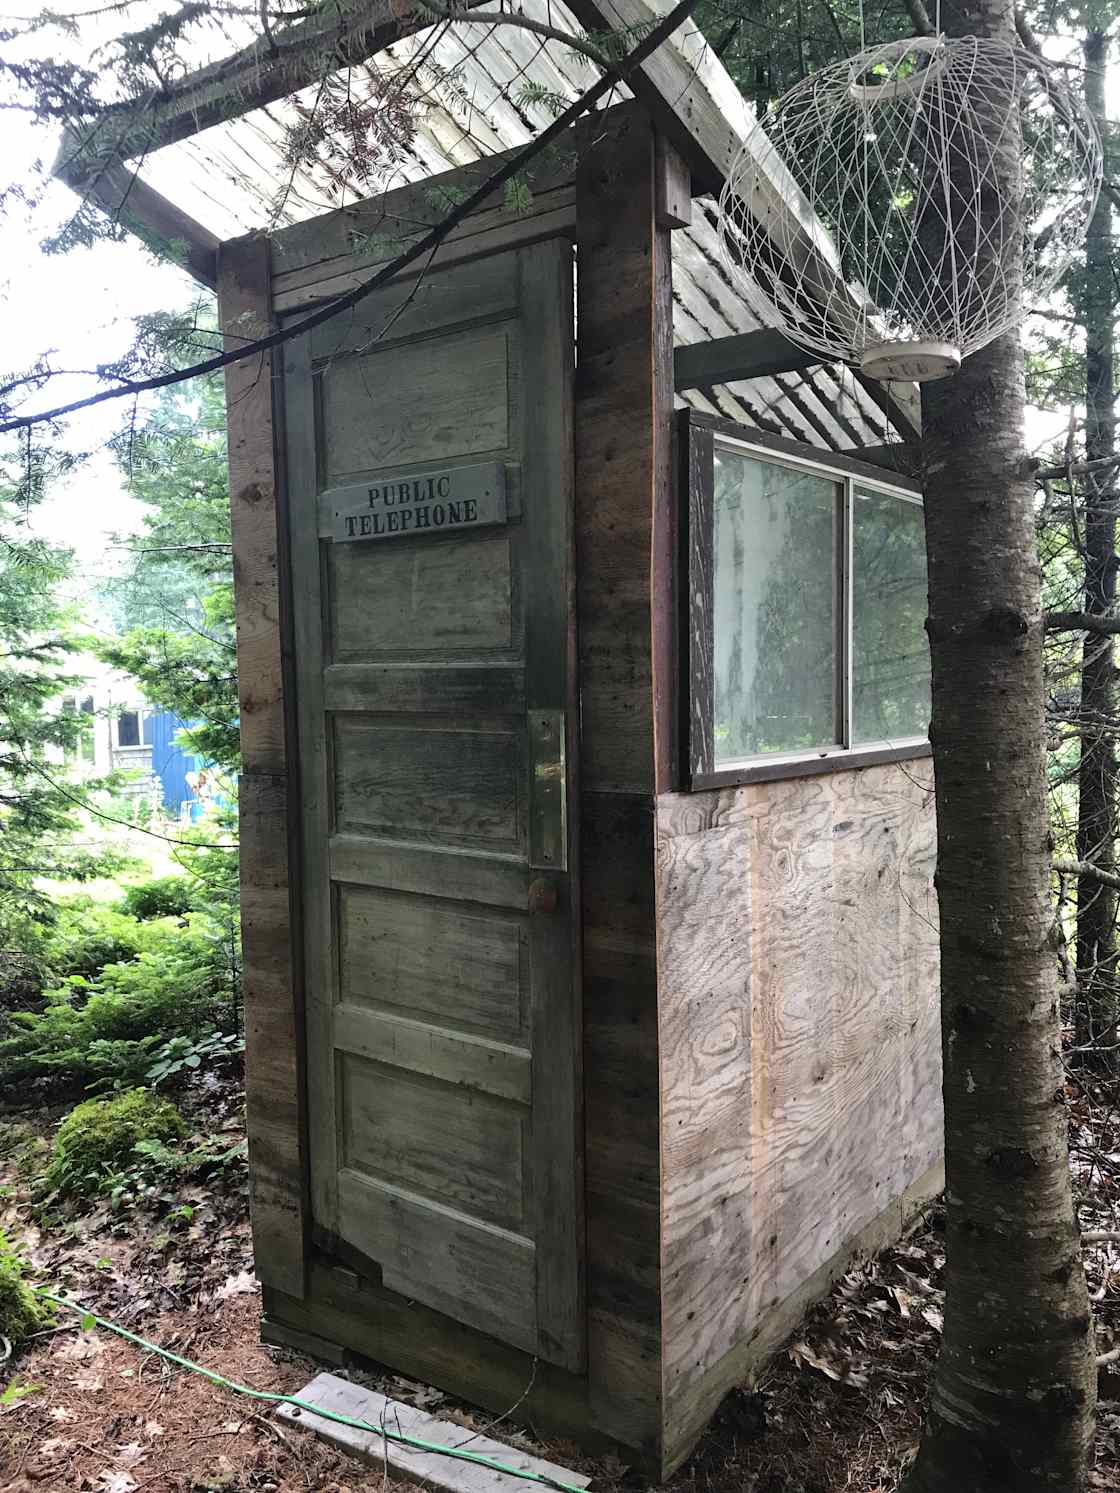 Custom outhouse. You can also take calls in there! 